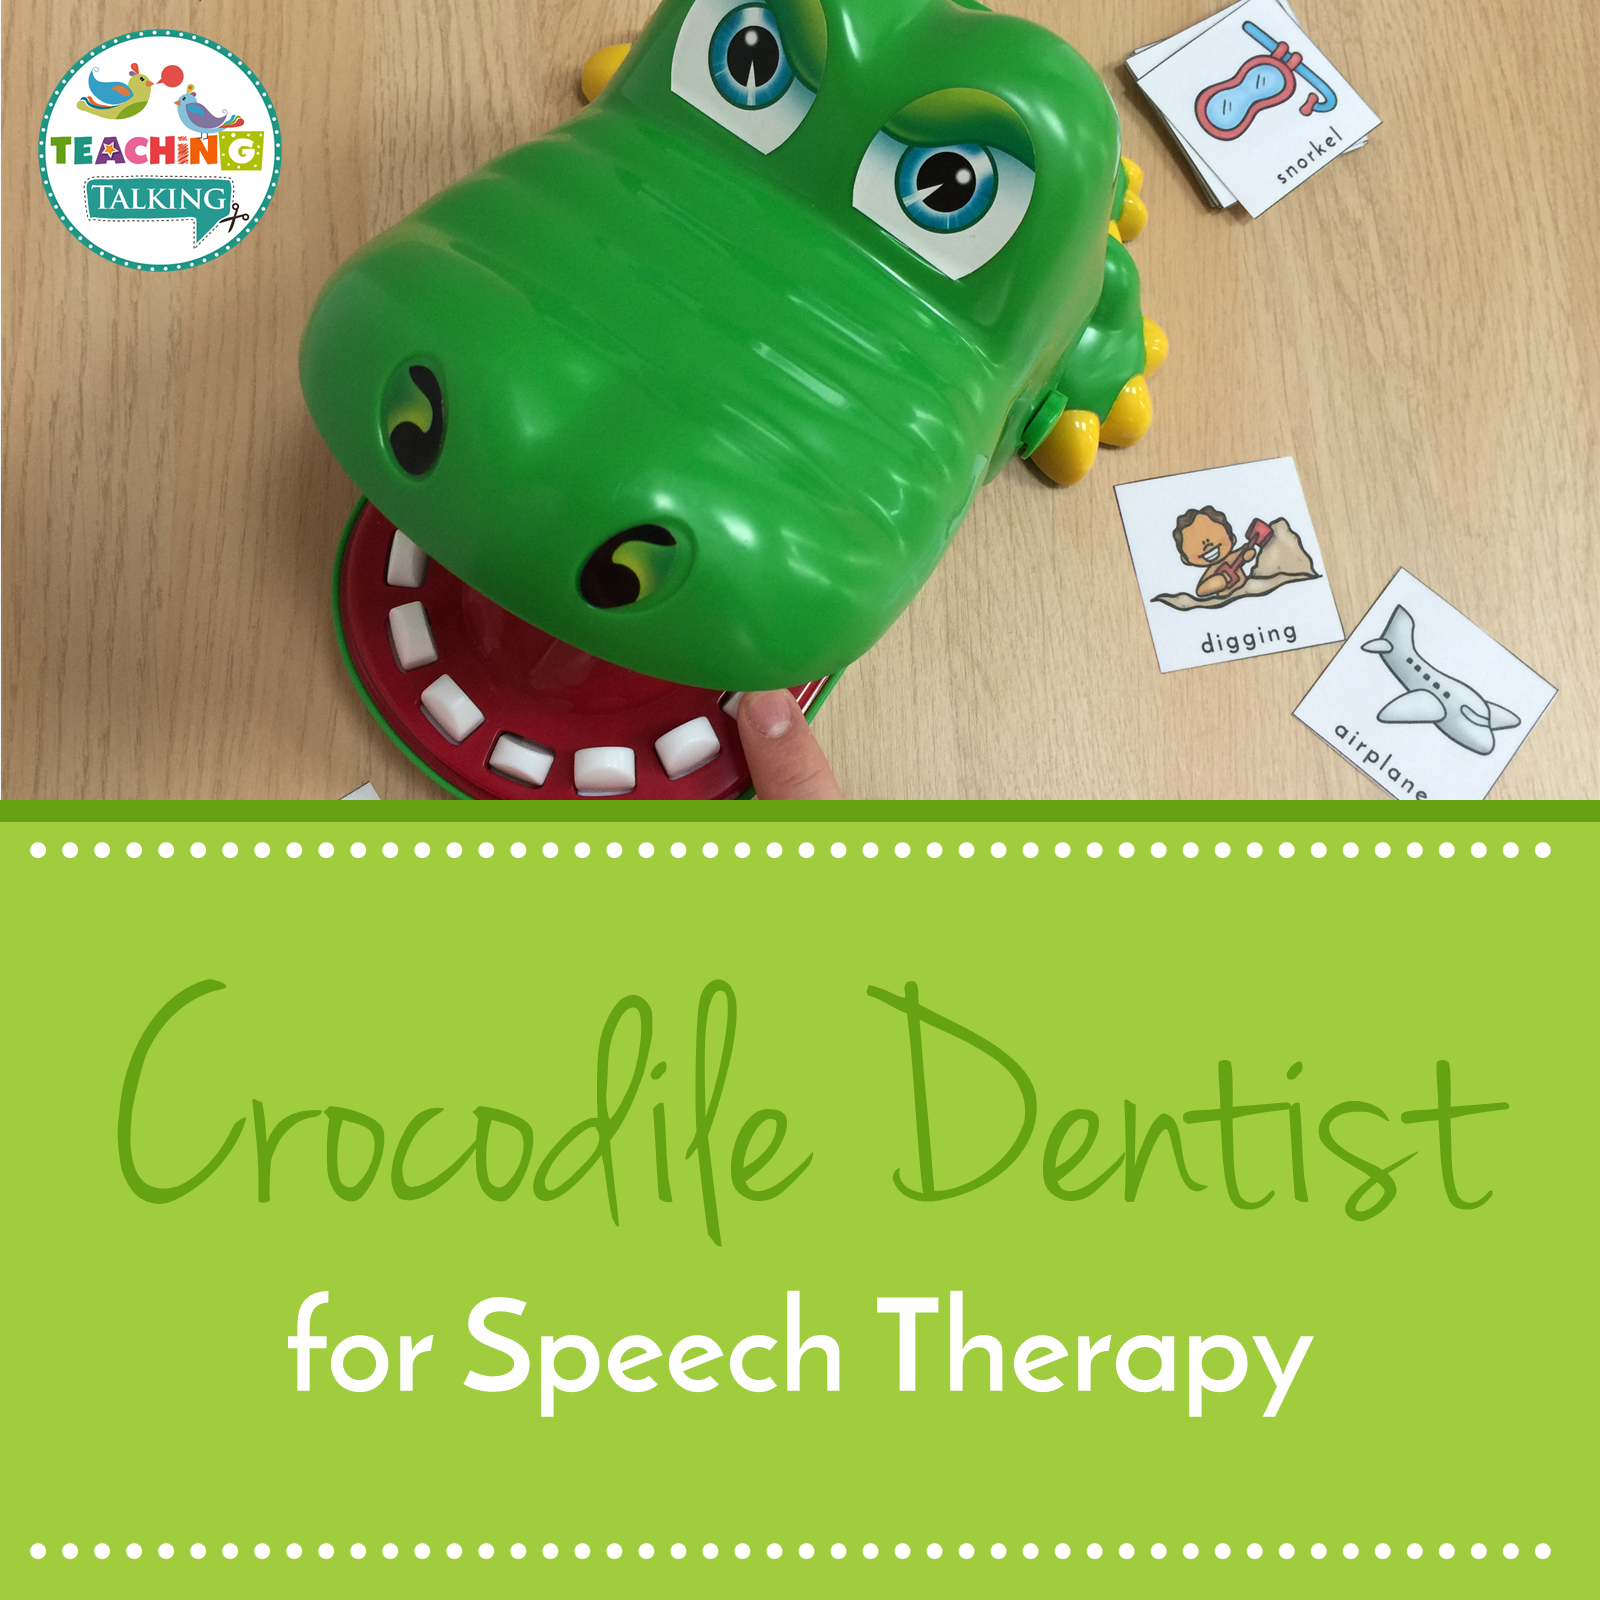 Using Crocodile Dentist for Speech Therapy